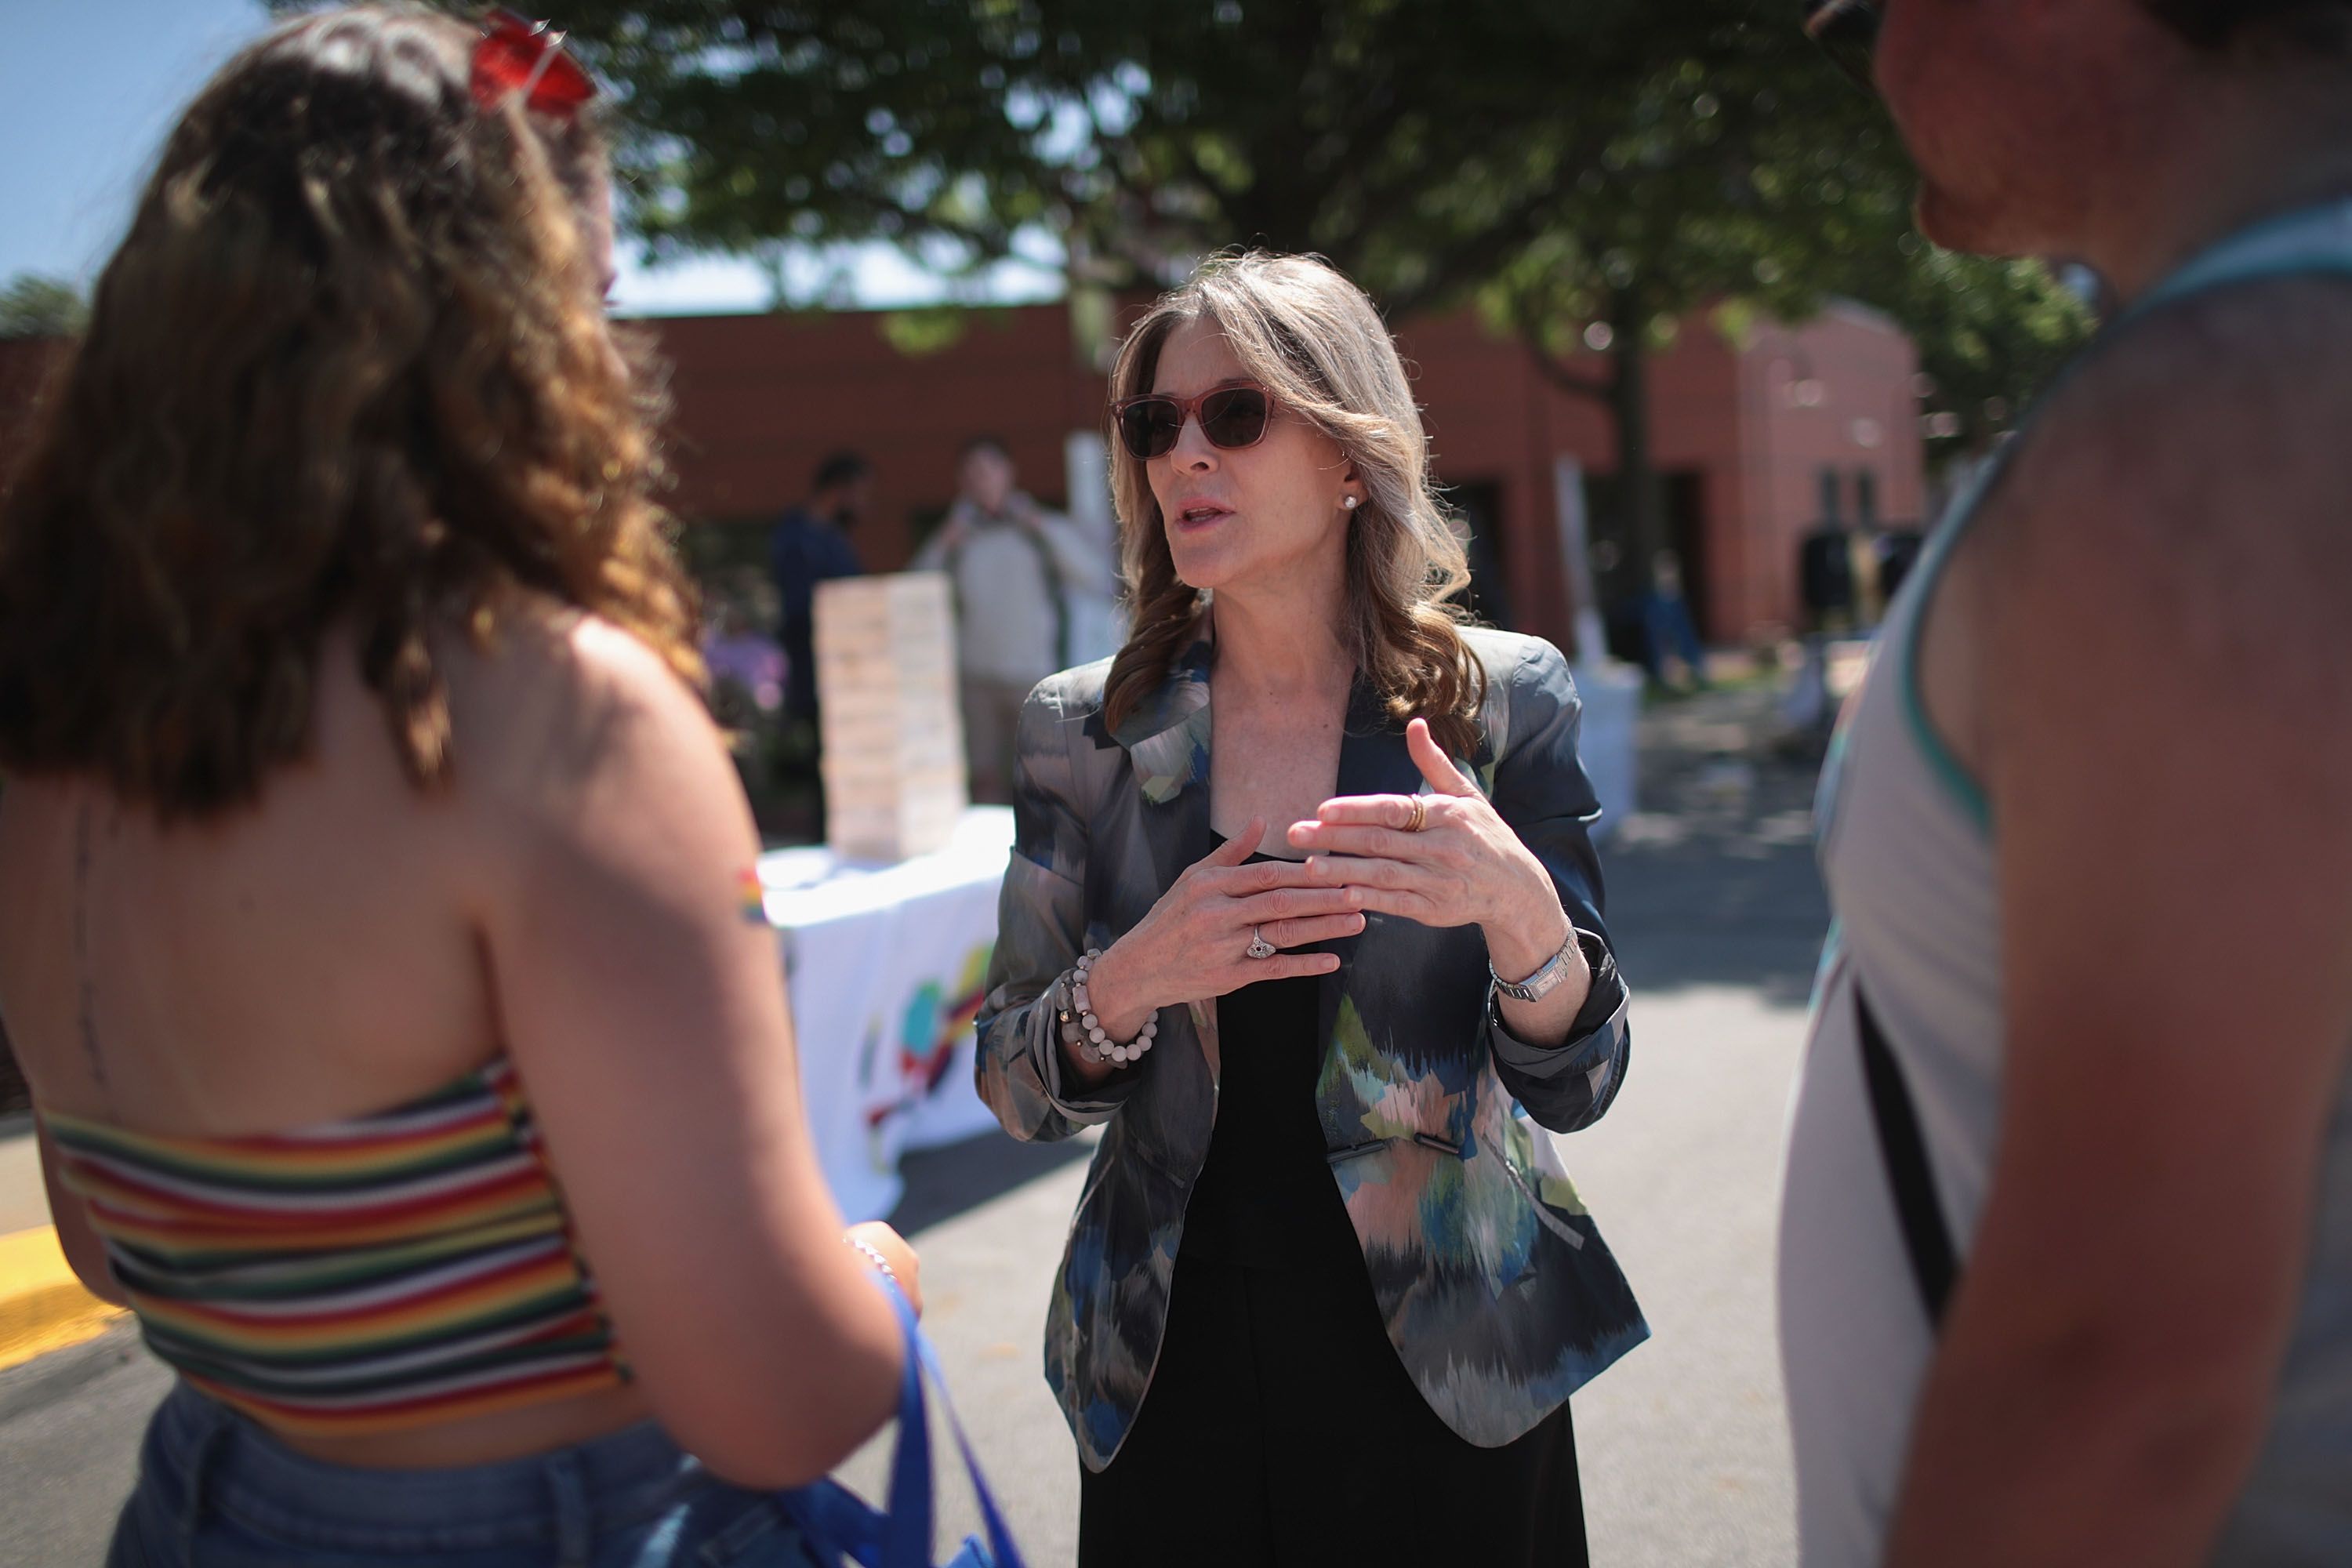 Democratic presidential candidate and self-help author Marianne Williamson greets people while campaigning at the Capital City Pride Fest on June 08, 2019 in Des Moines, Iowa. 